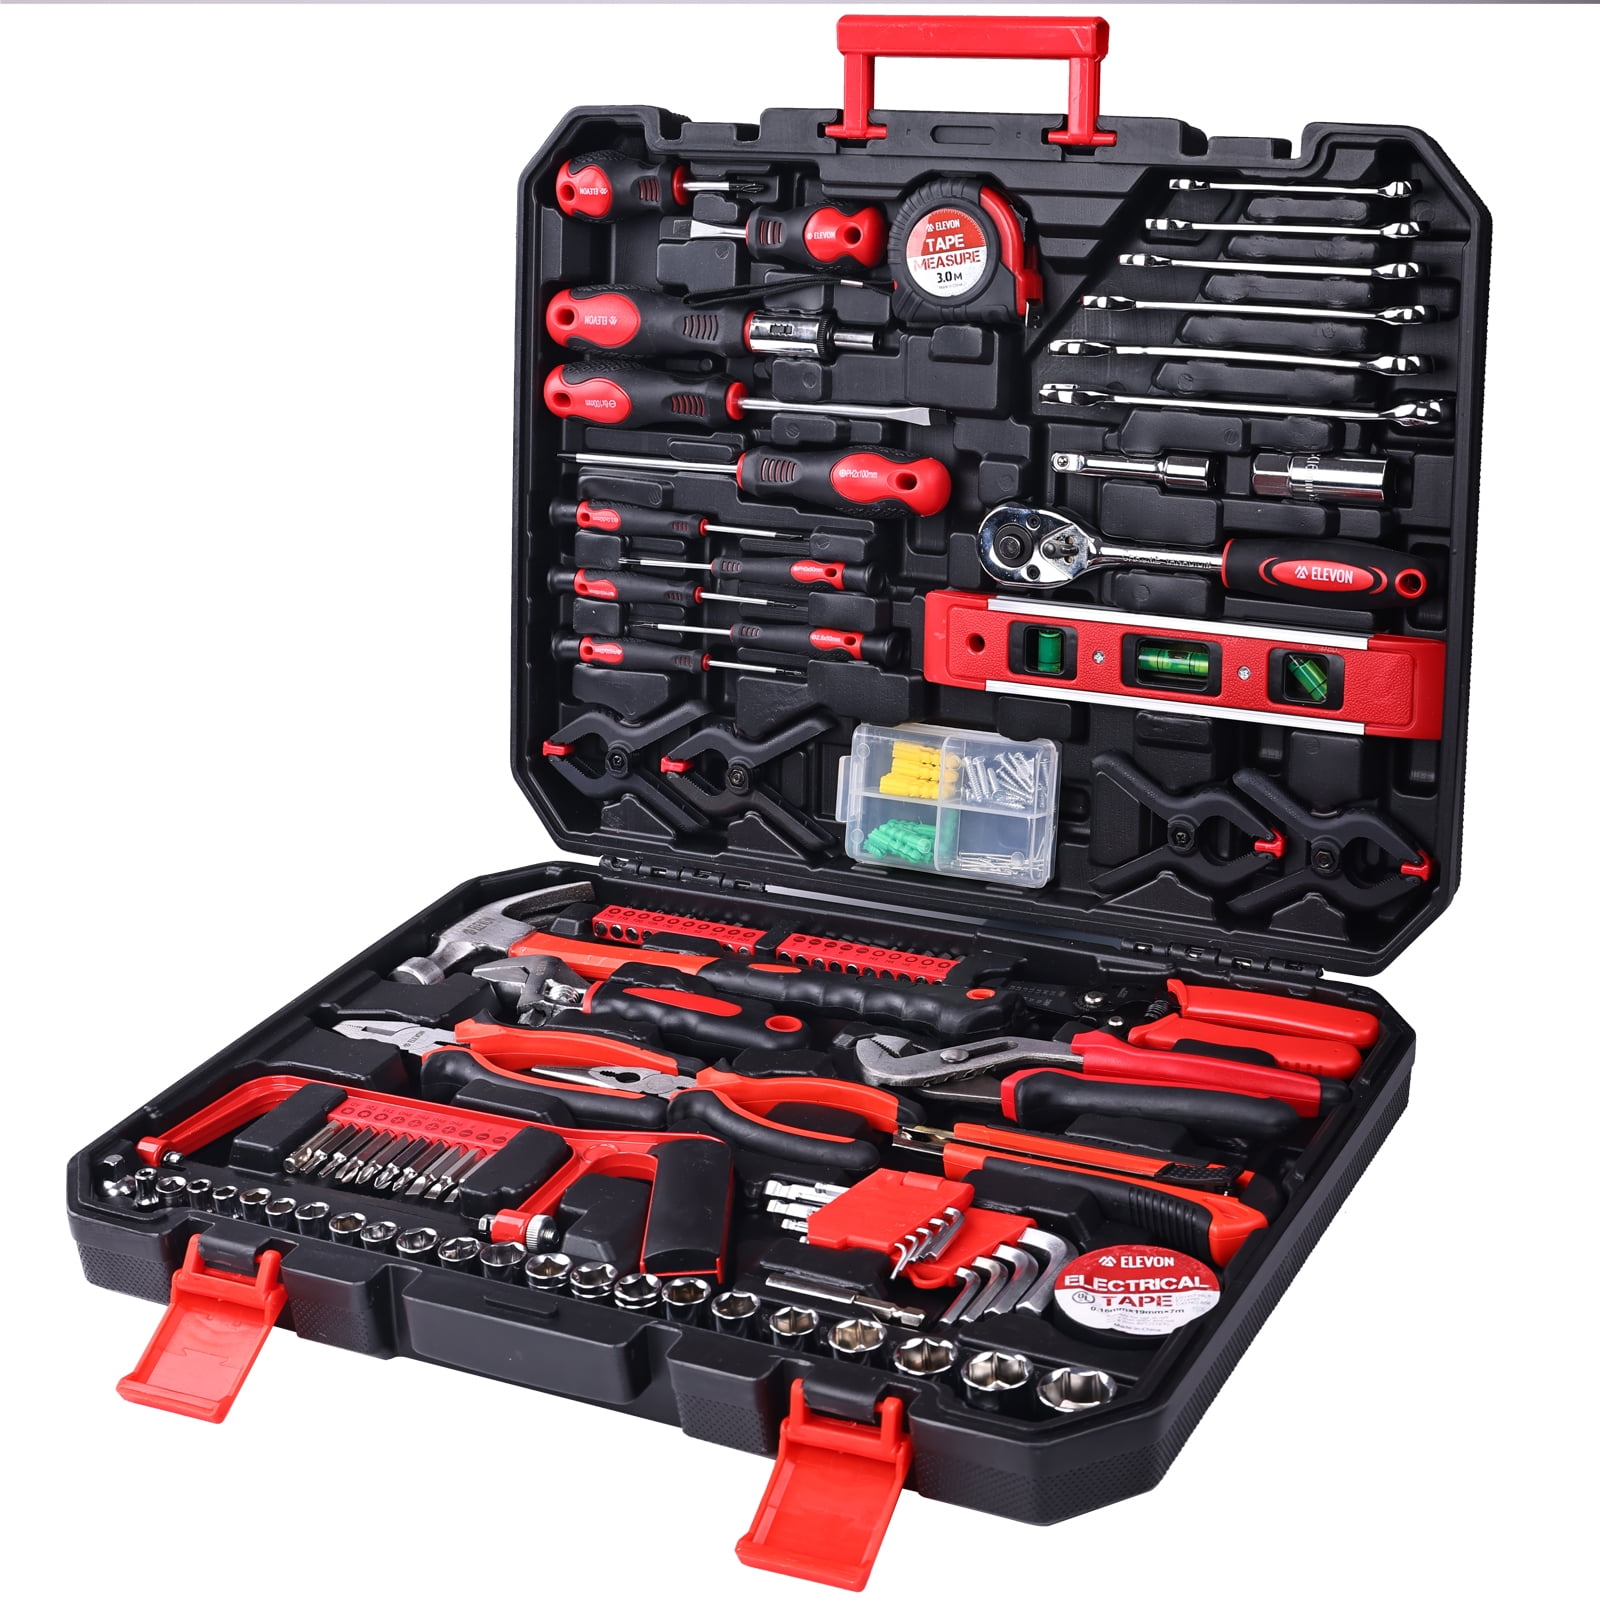 BalanceFrom 217 Piece Tool Kit,Home Repair Tool with Socket